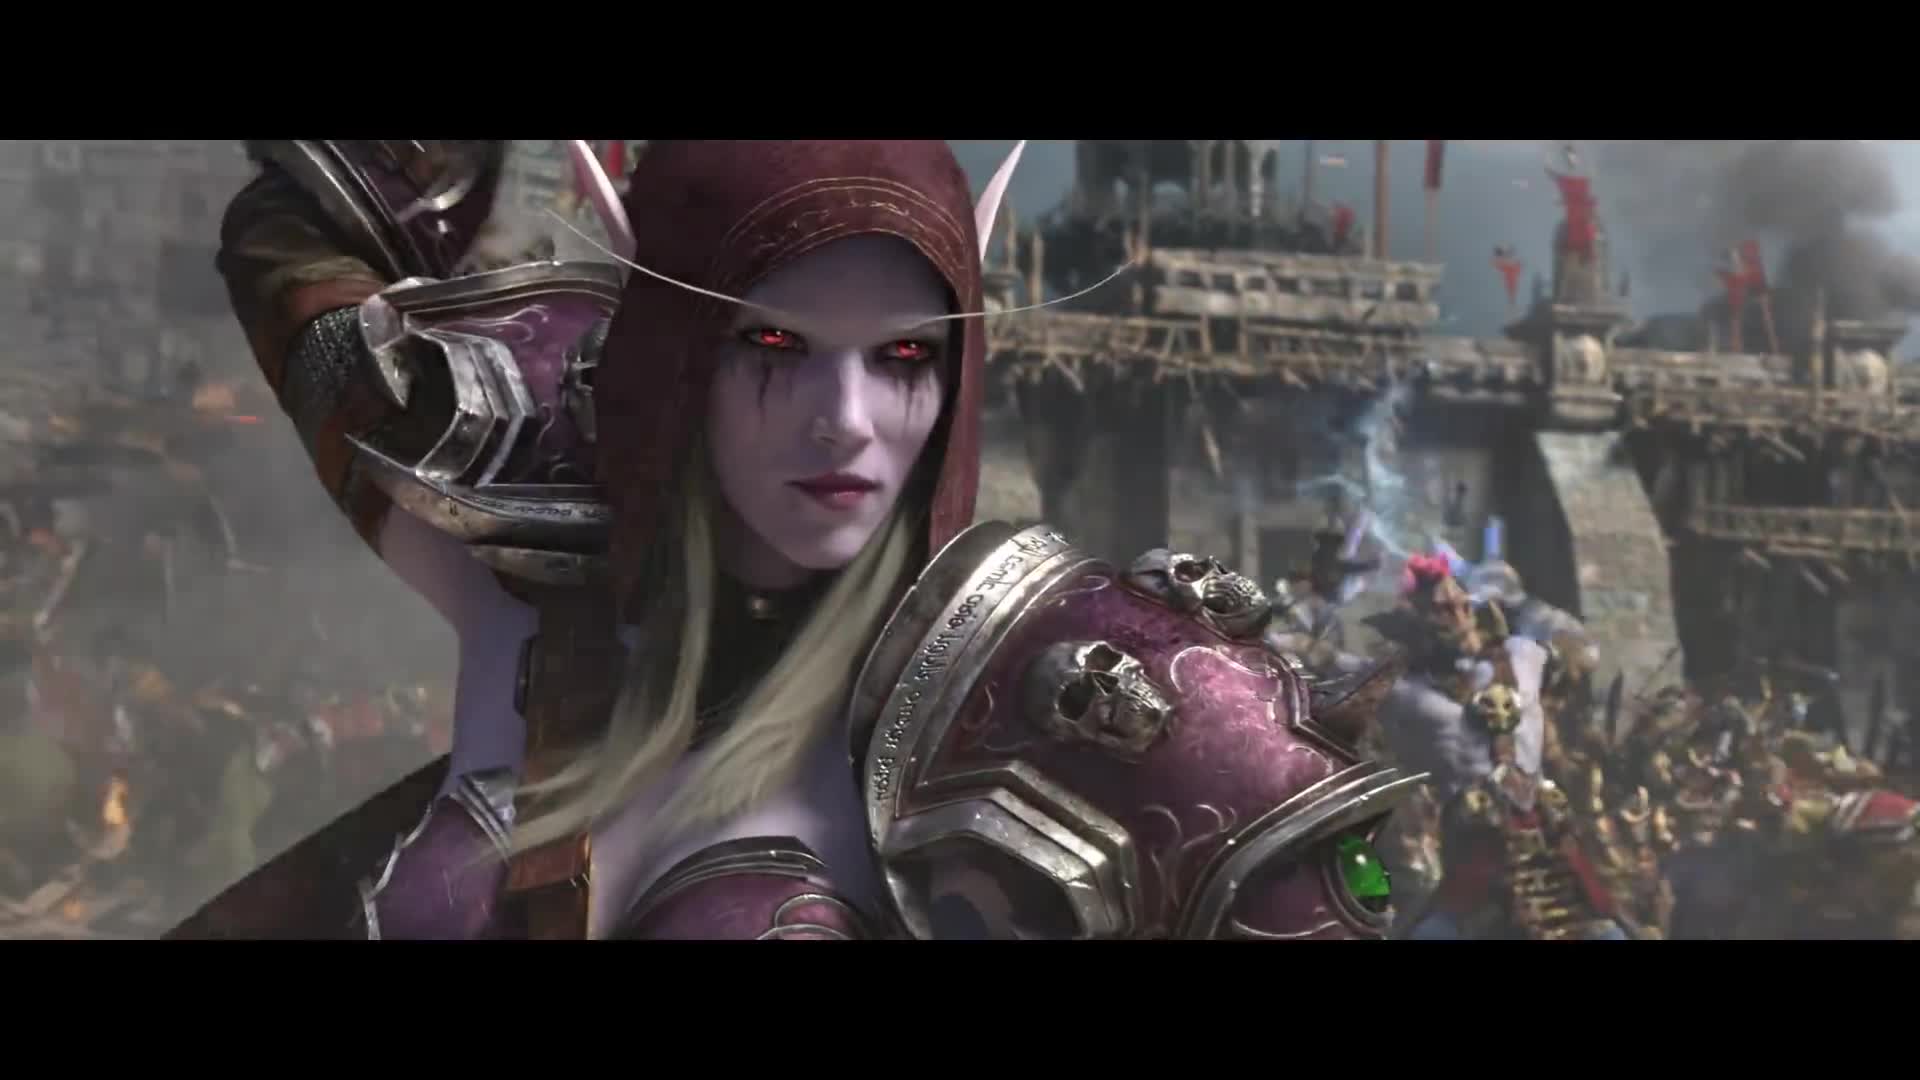 World of Warcraft: Battle for Azeroth  - For Whom the Bell Tolls trailer